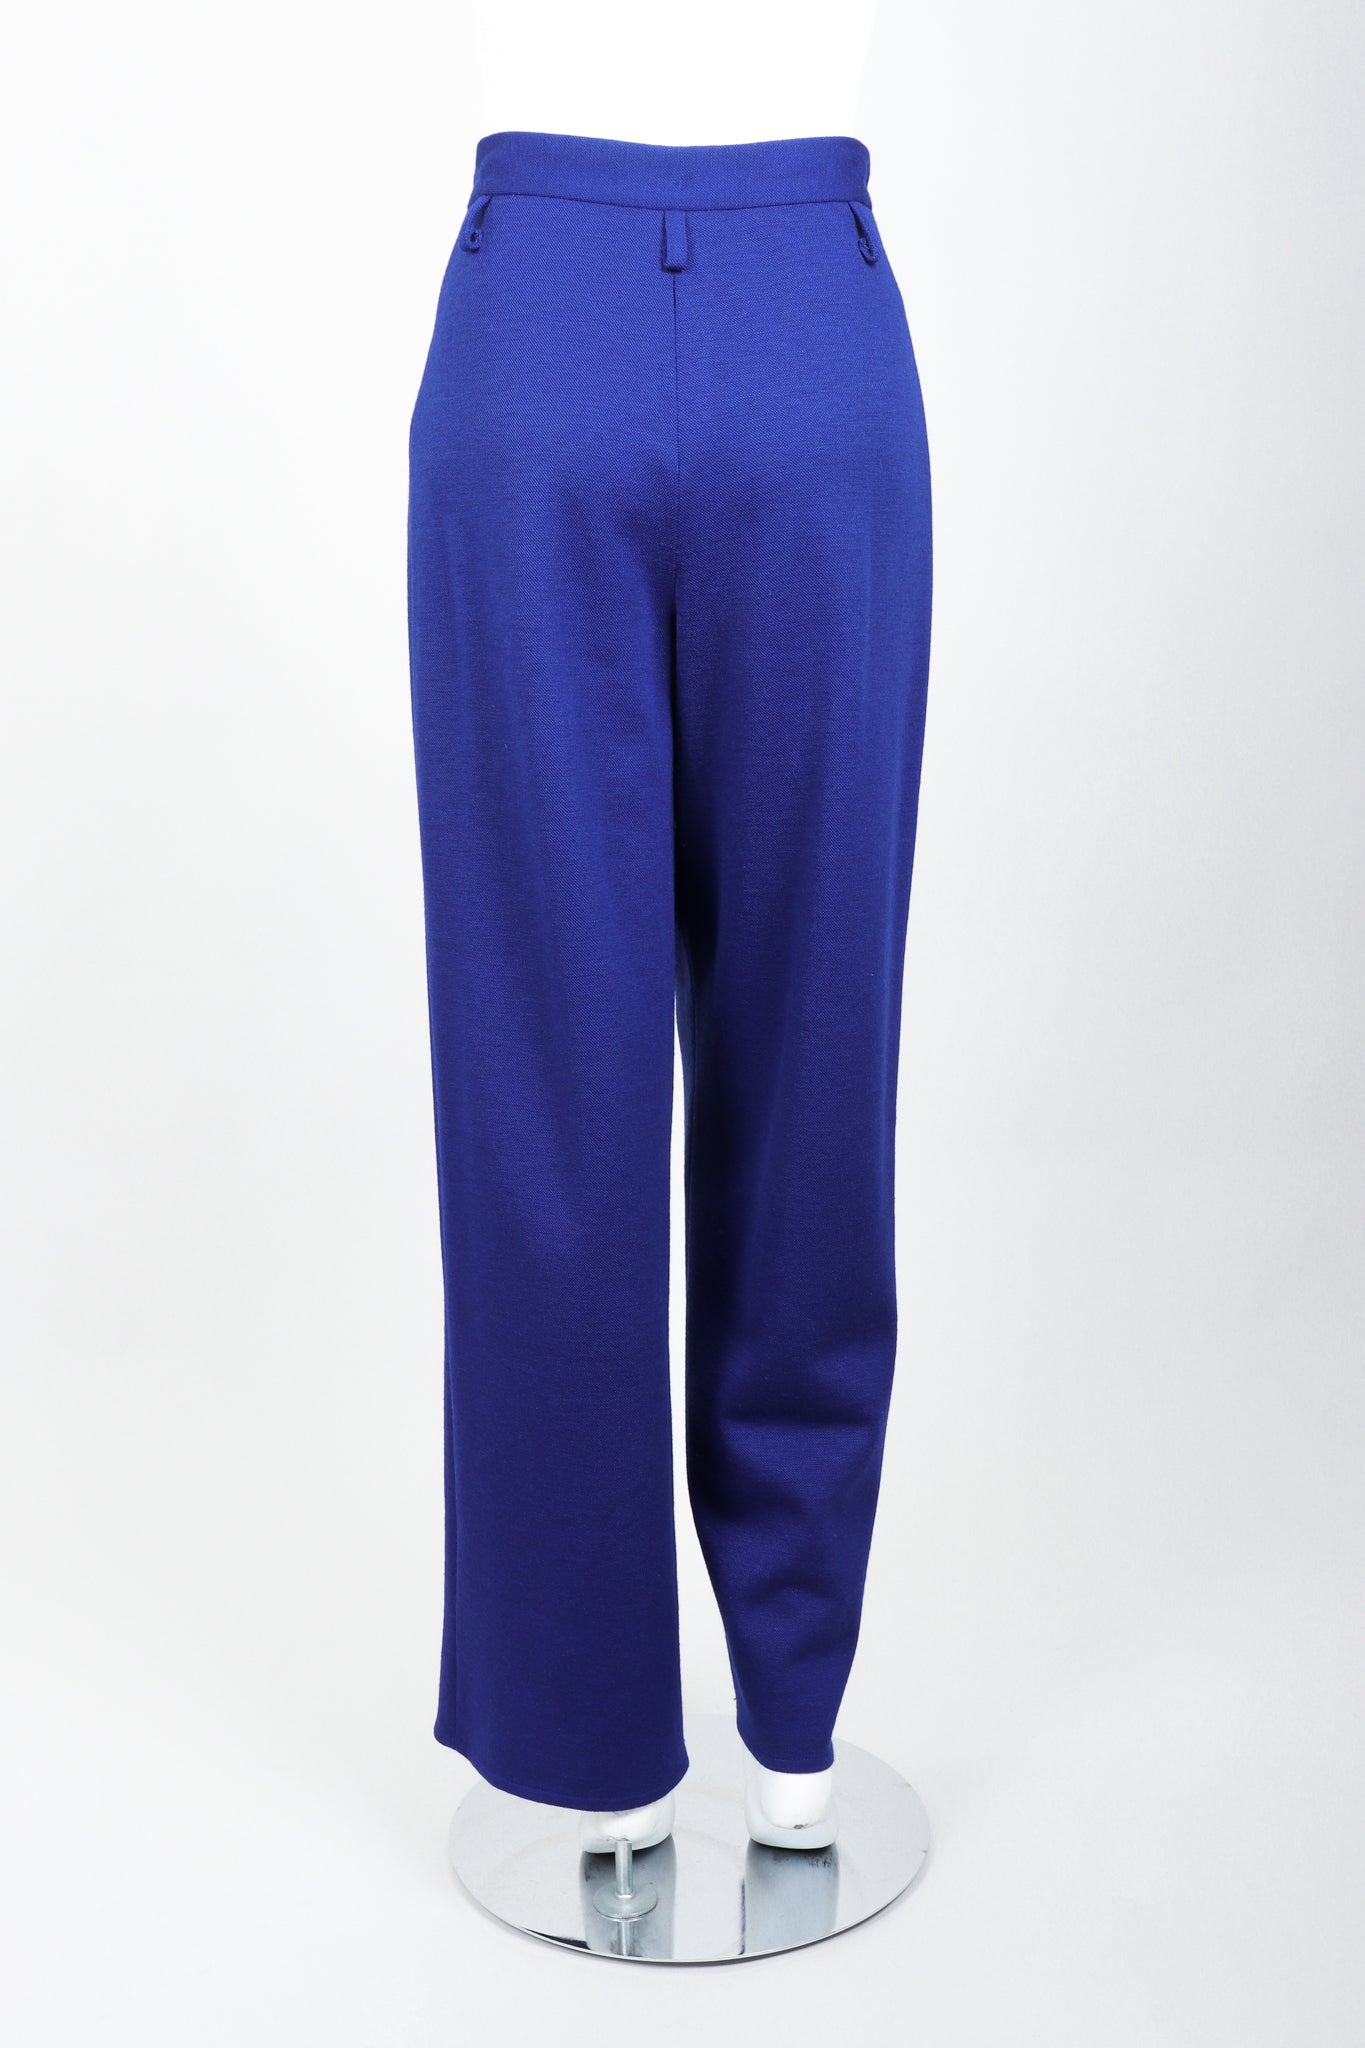 Vintage Sonia Rykiel Blue Knit Pleated Pant on Mannequin Back at Recess